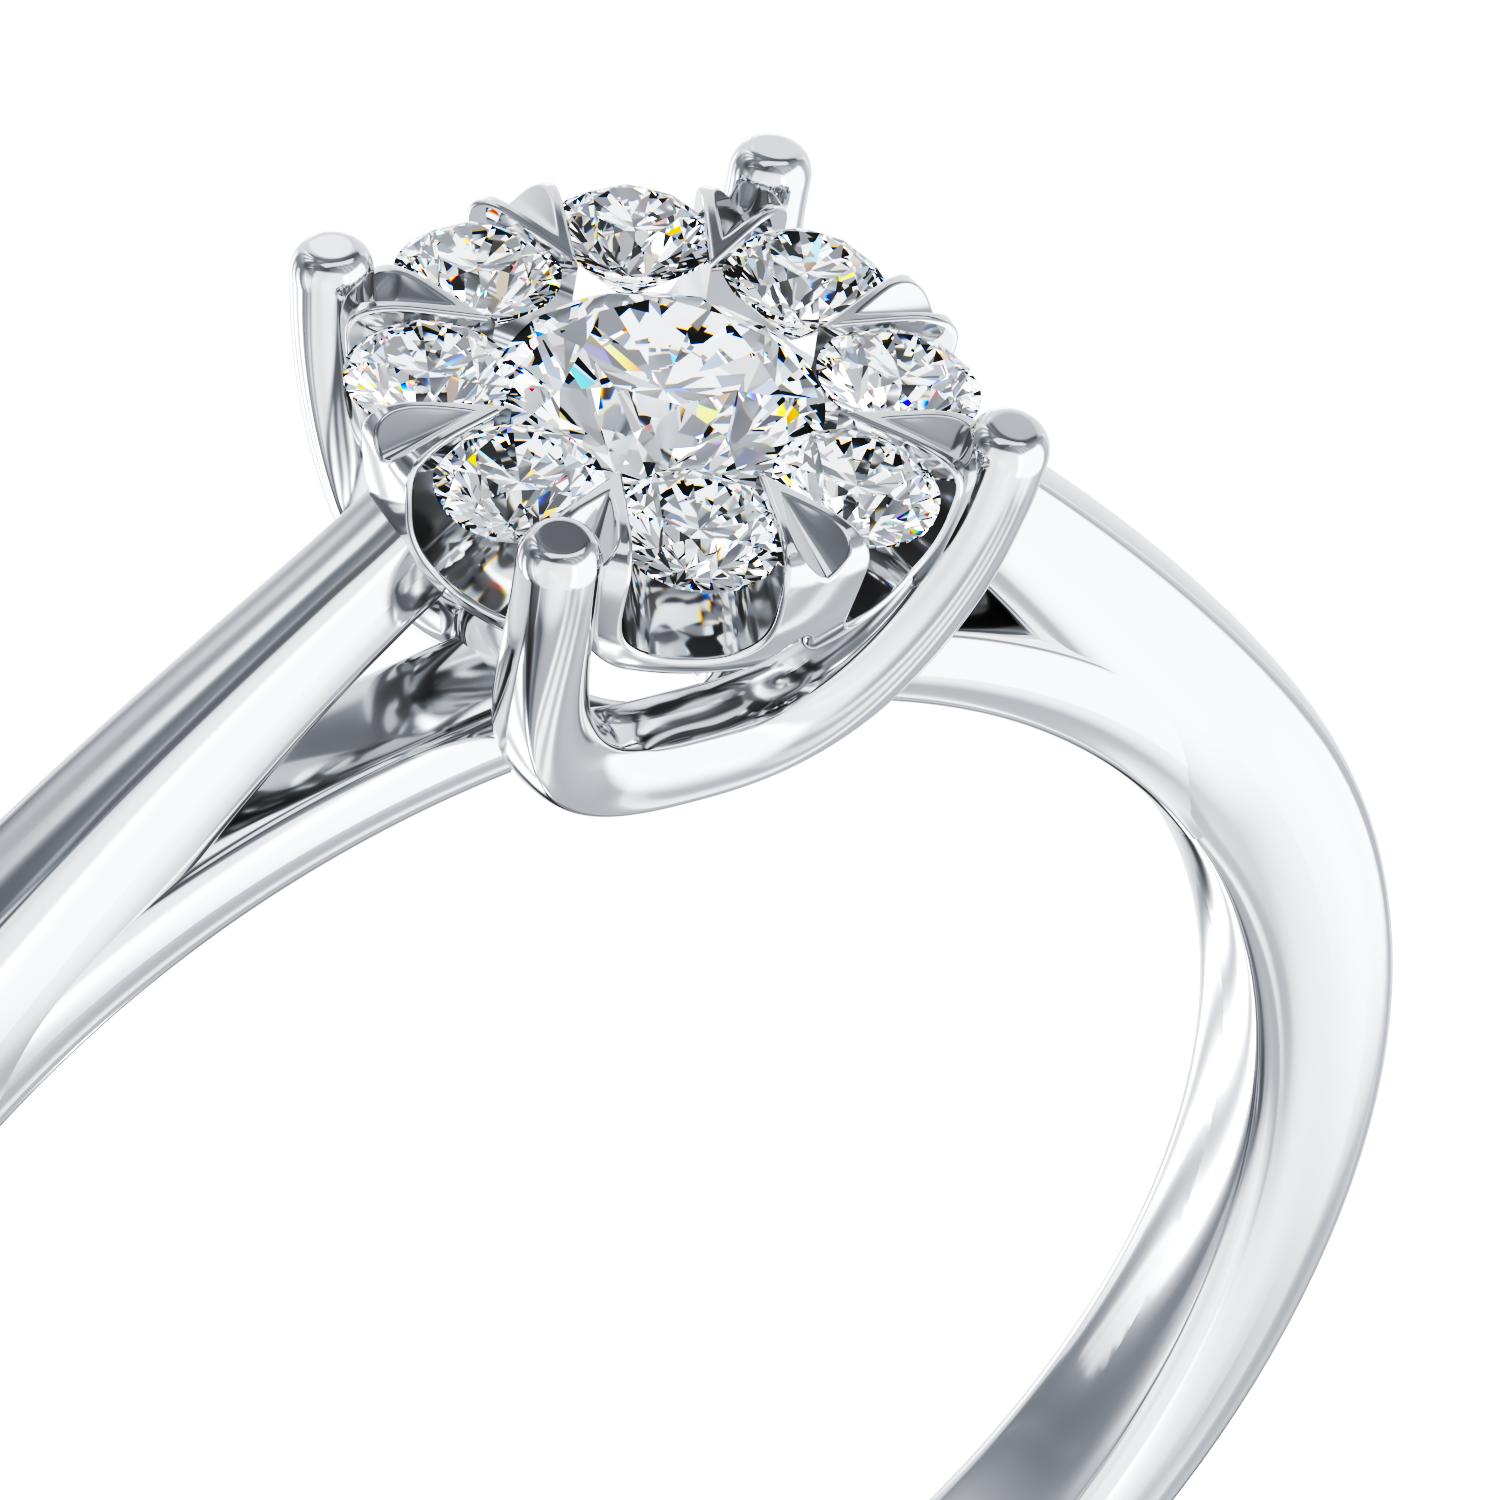 18K white gold engagement ring with 0.15ct diamonds